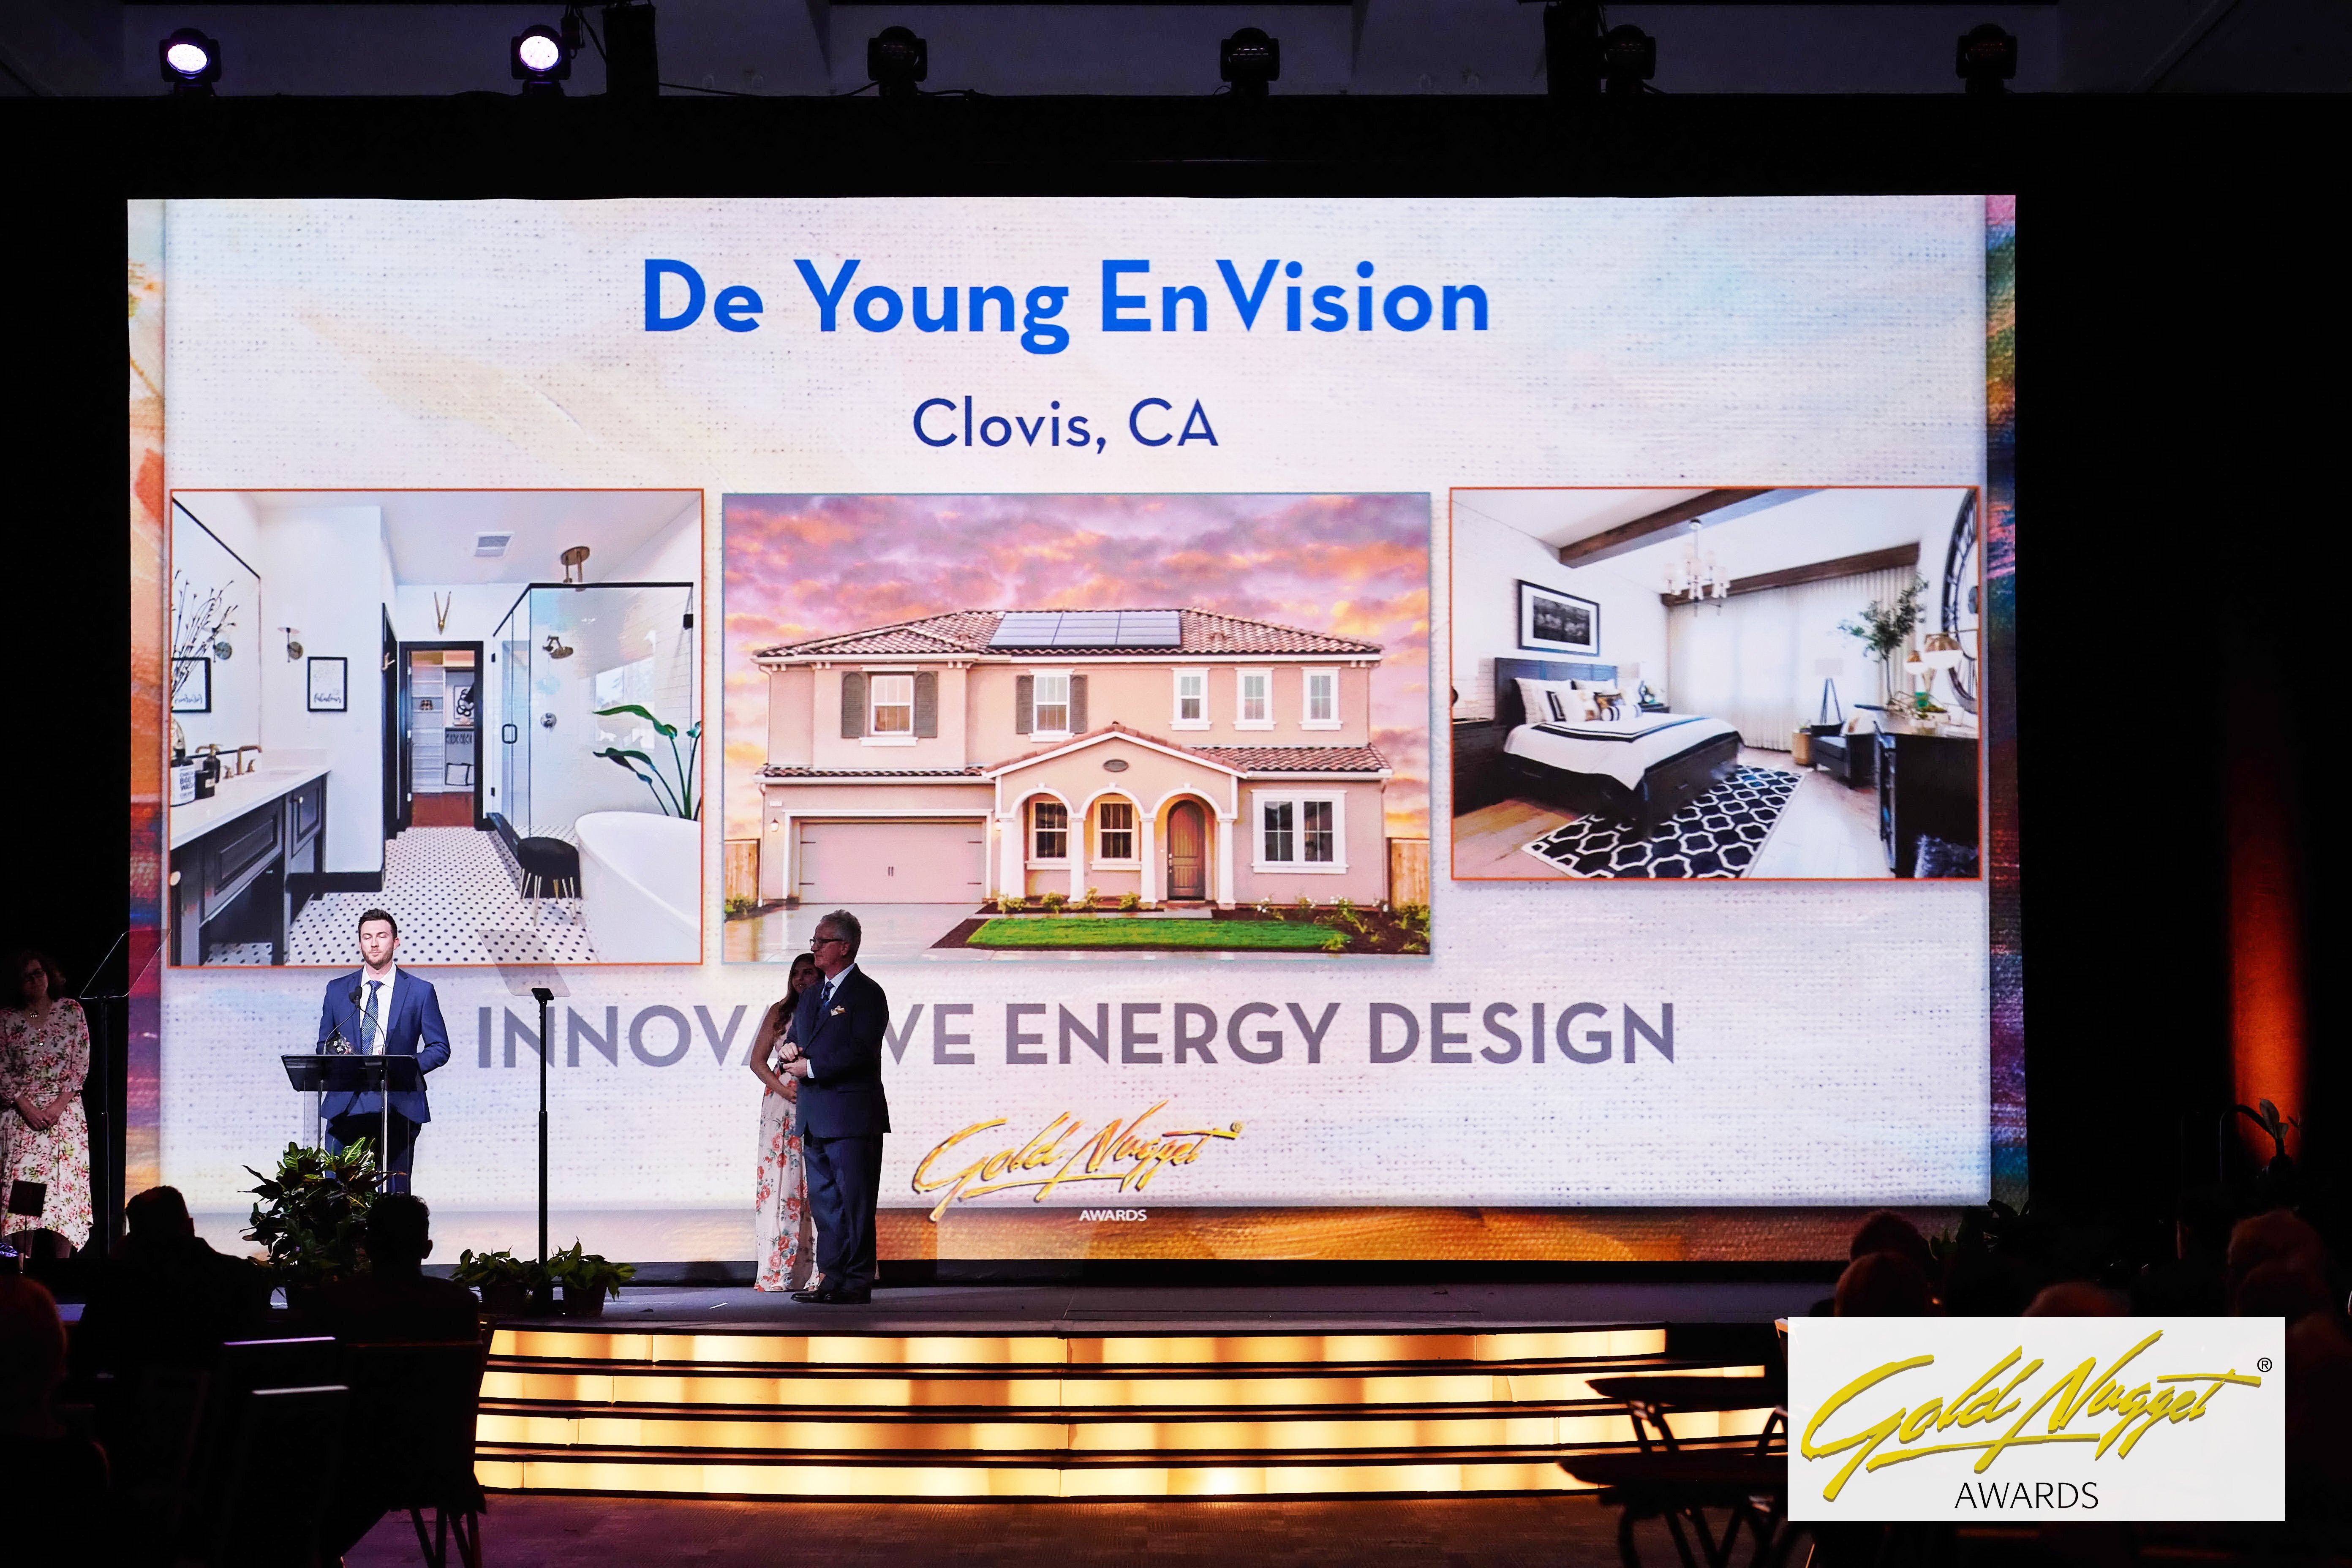 De Young Properties Receives Best Innovative Energy Design for De Young EnVision in Clovis!